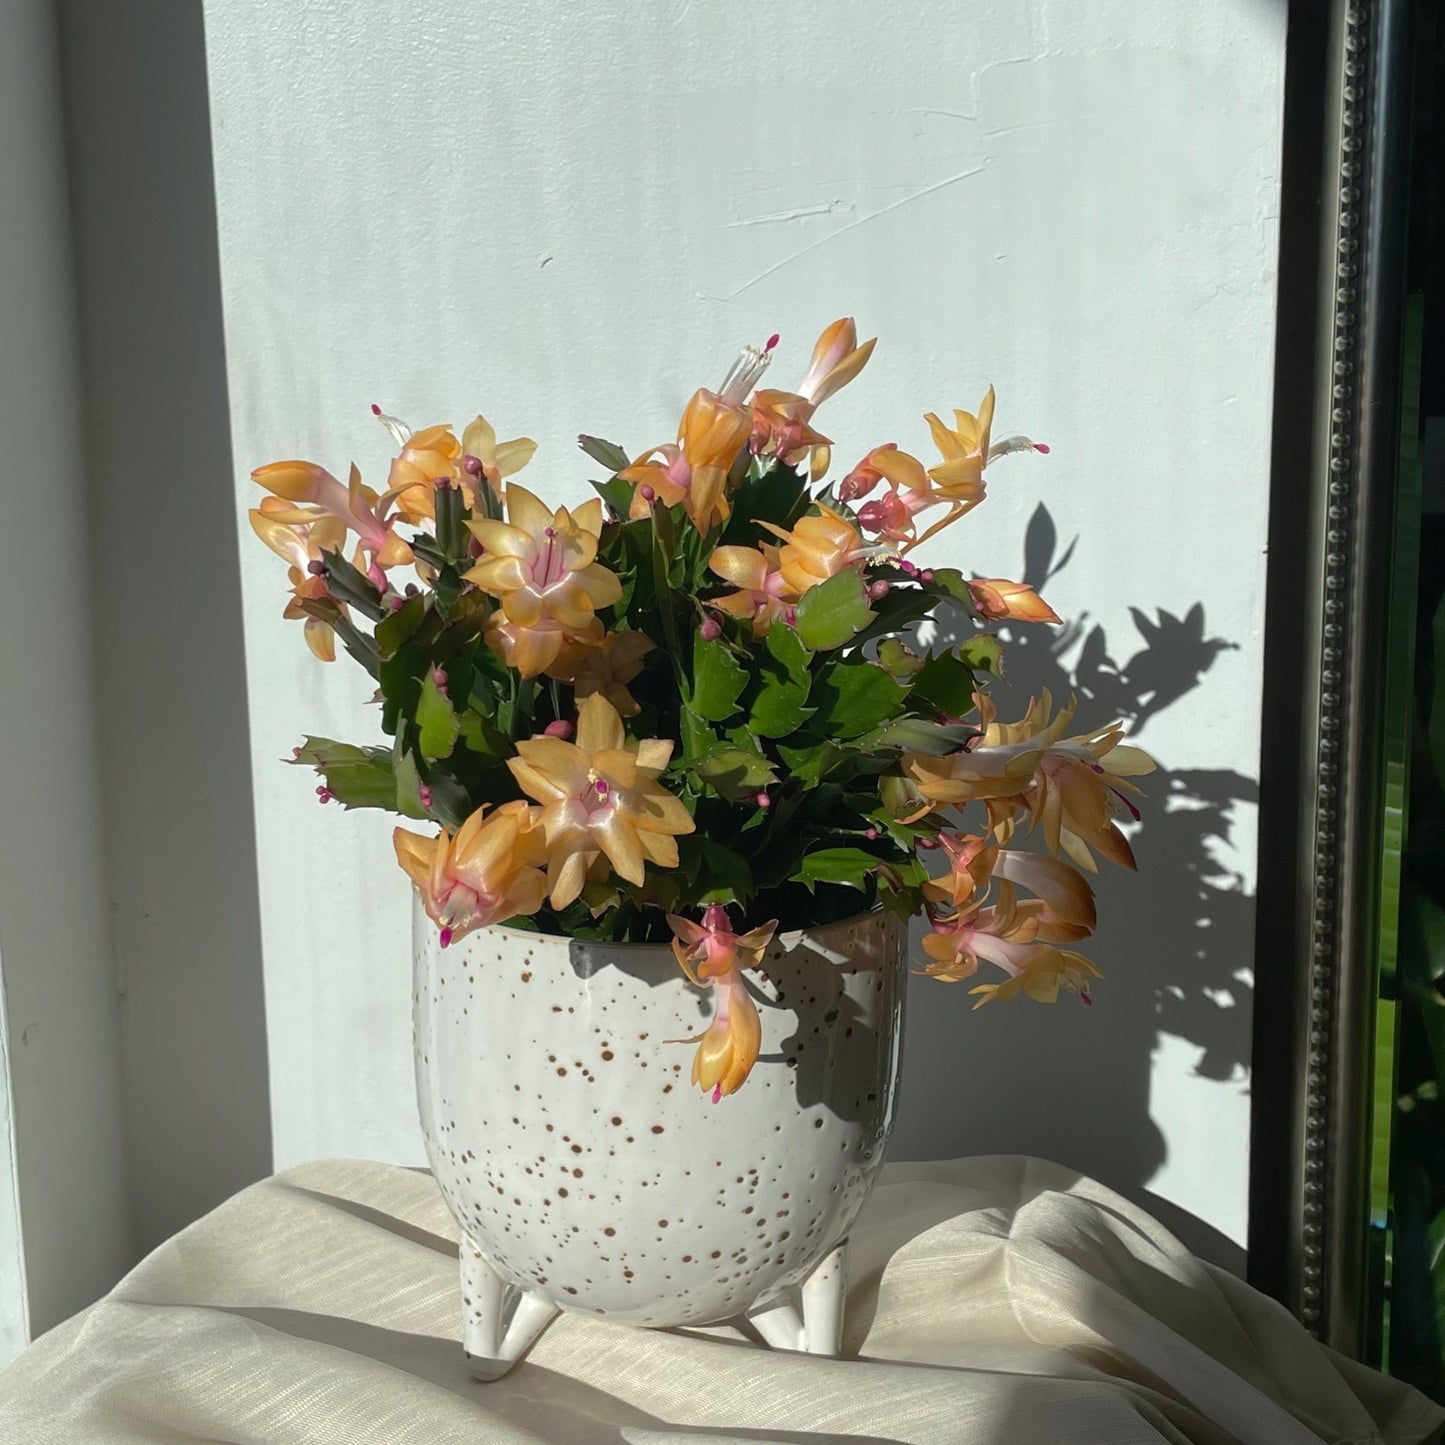 Apricot Christmas cactus in ceramic pot, Toronto plant delivery, Toronto flower delivery